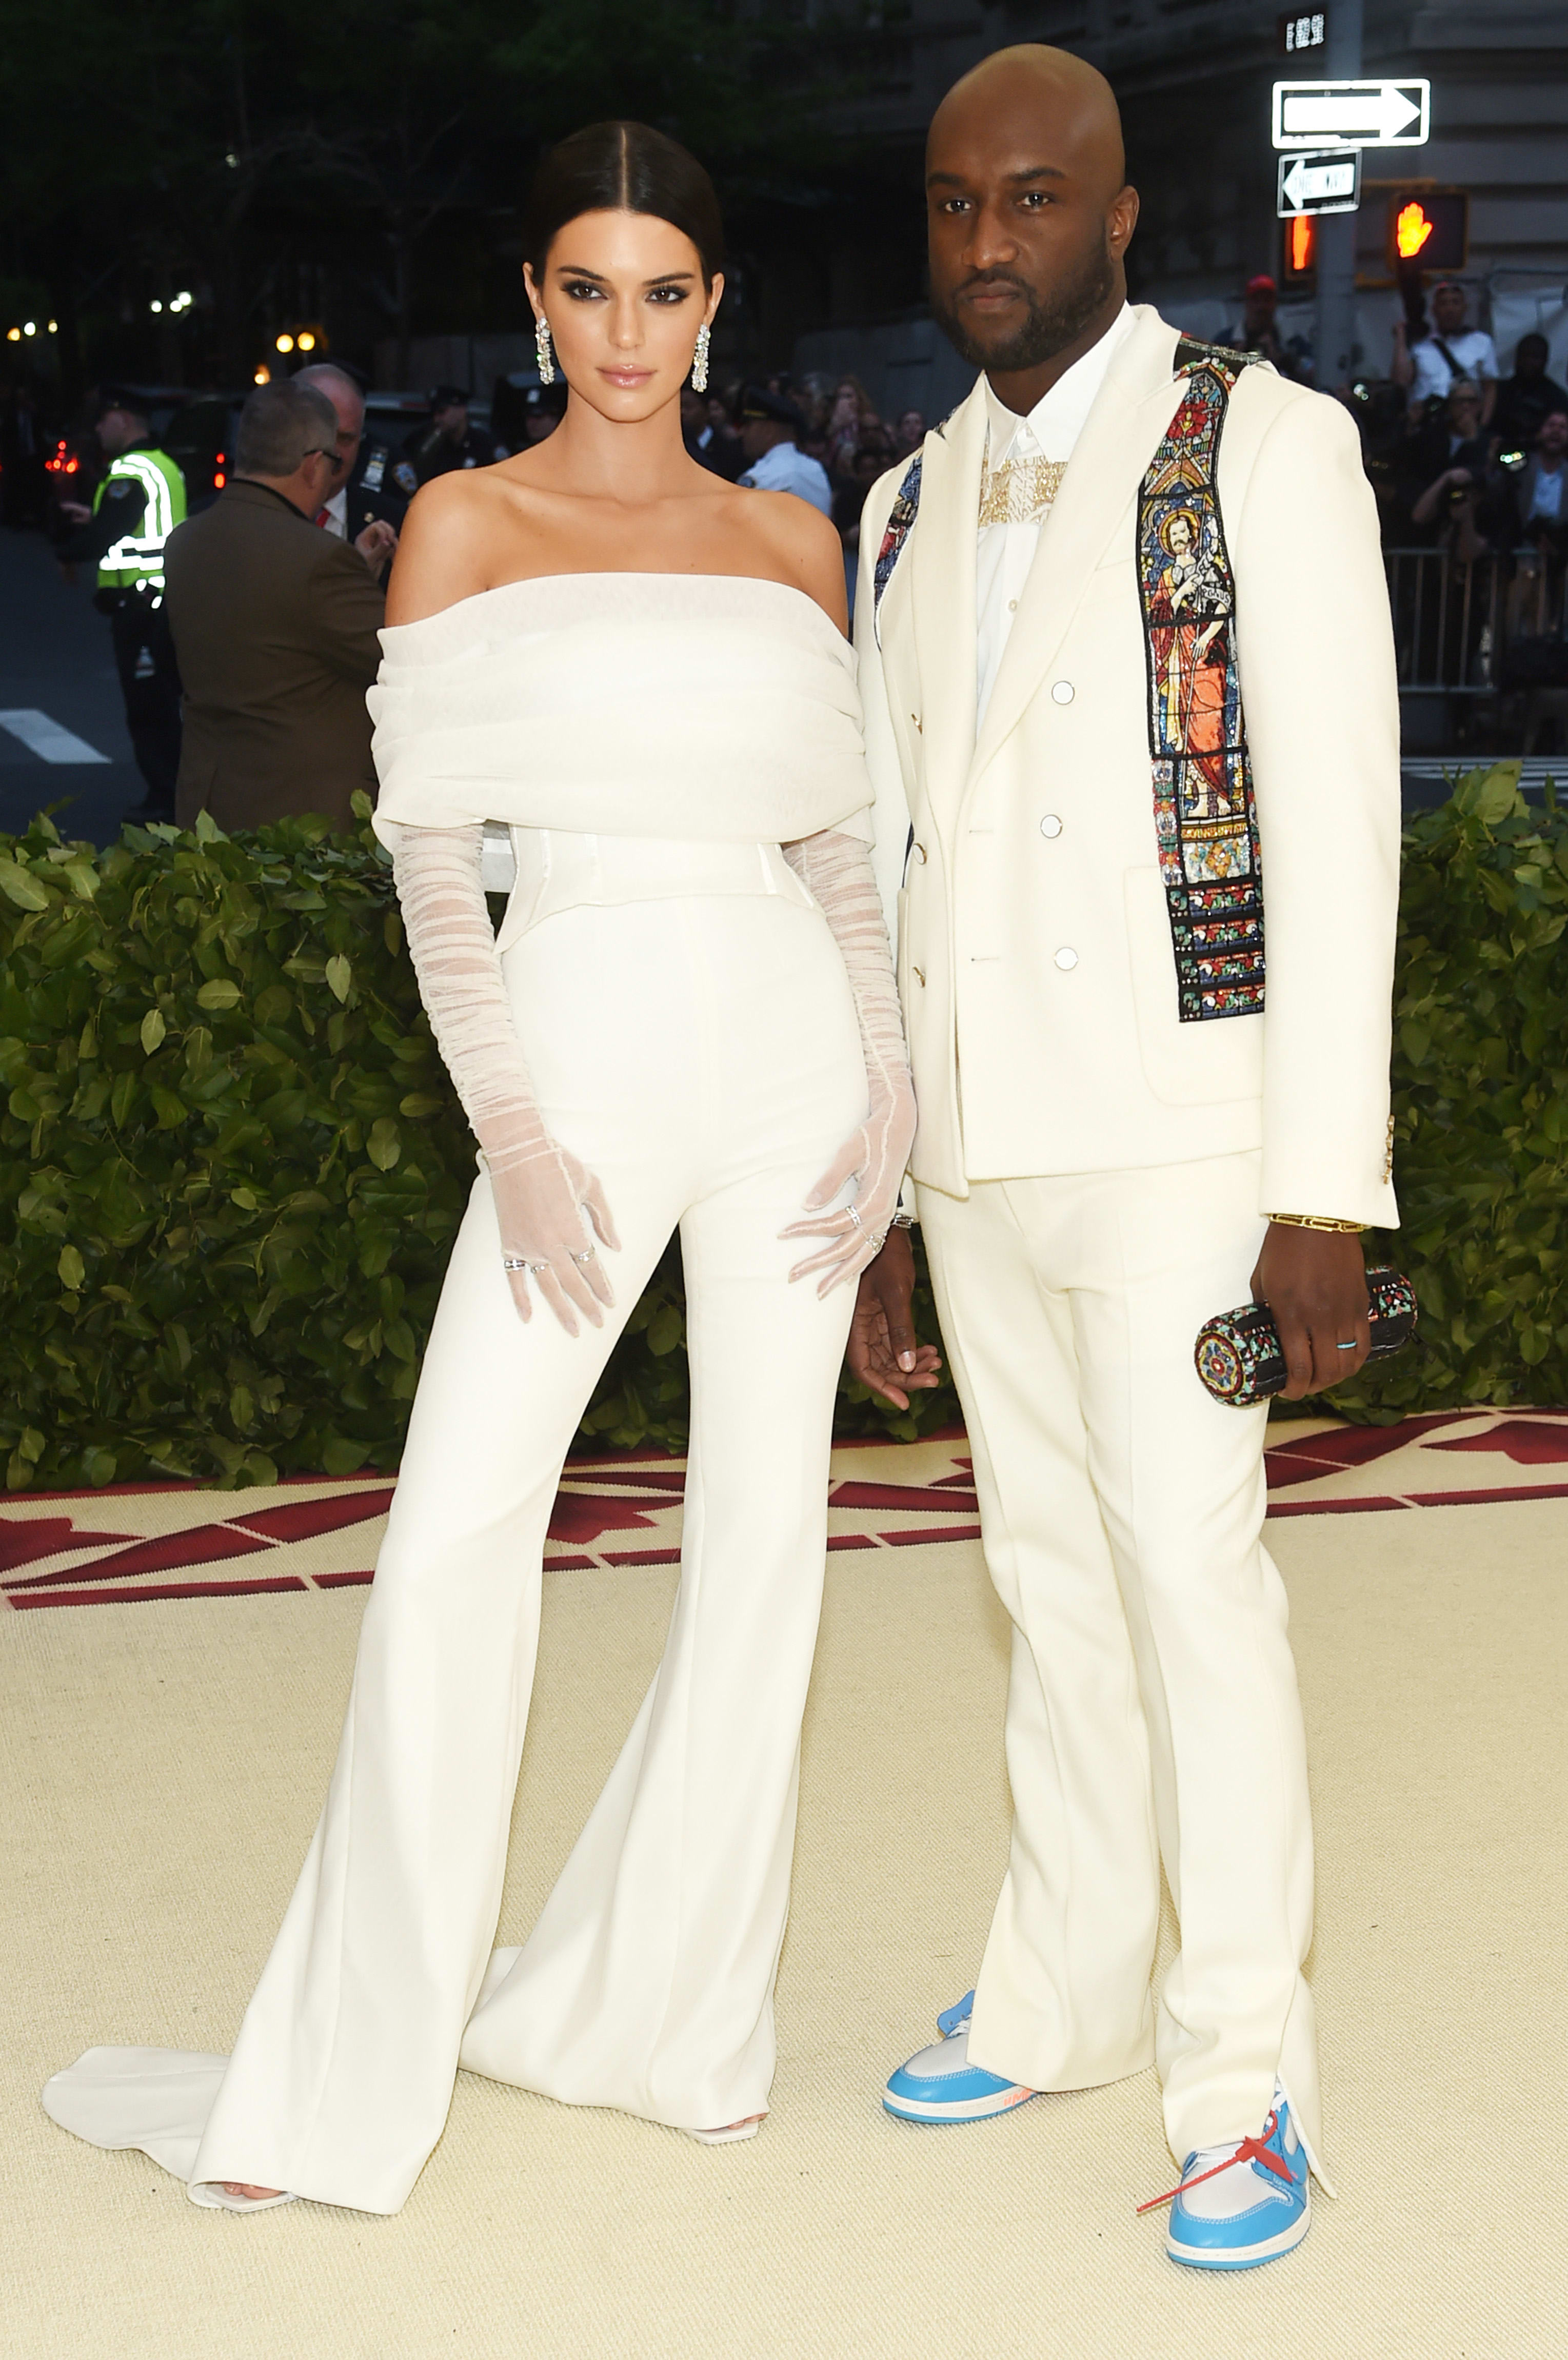 Kendall Jenner and Virgil Abloh at the Met Gala